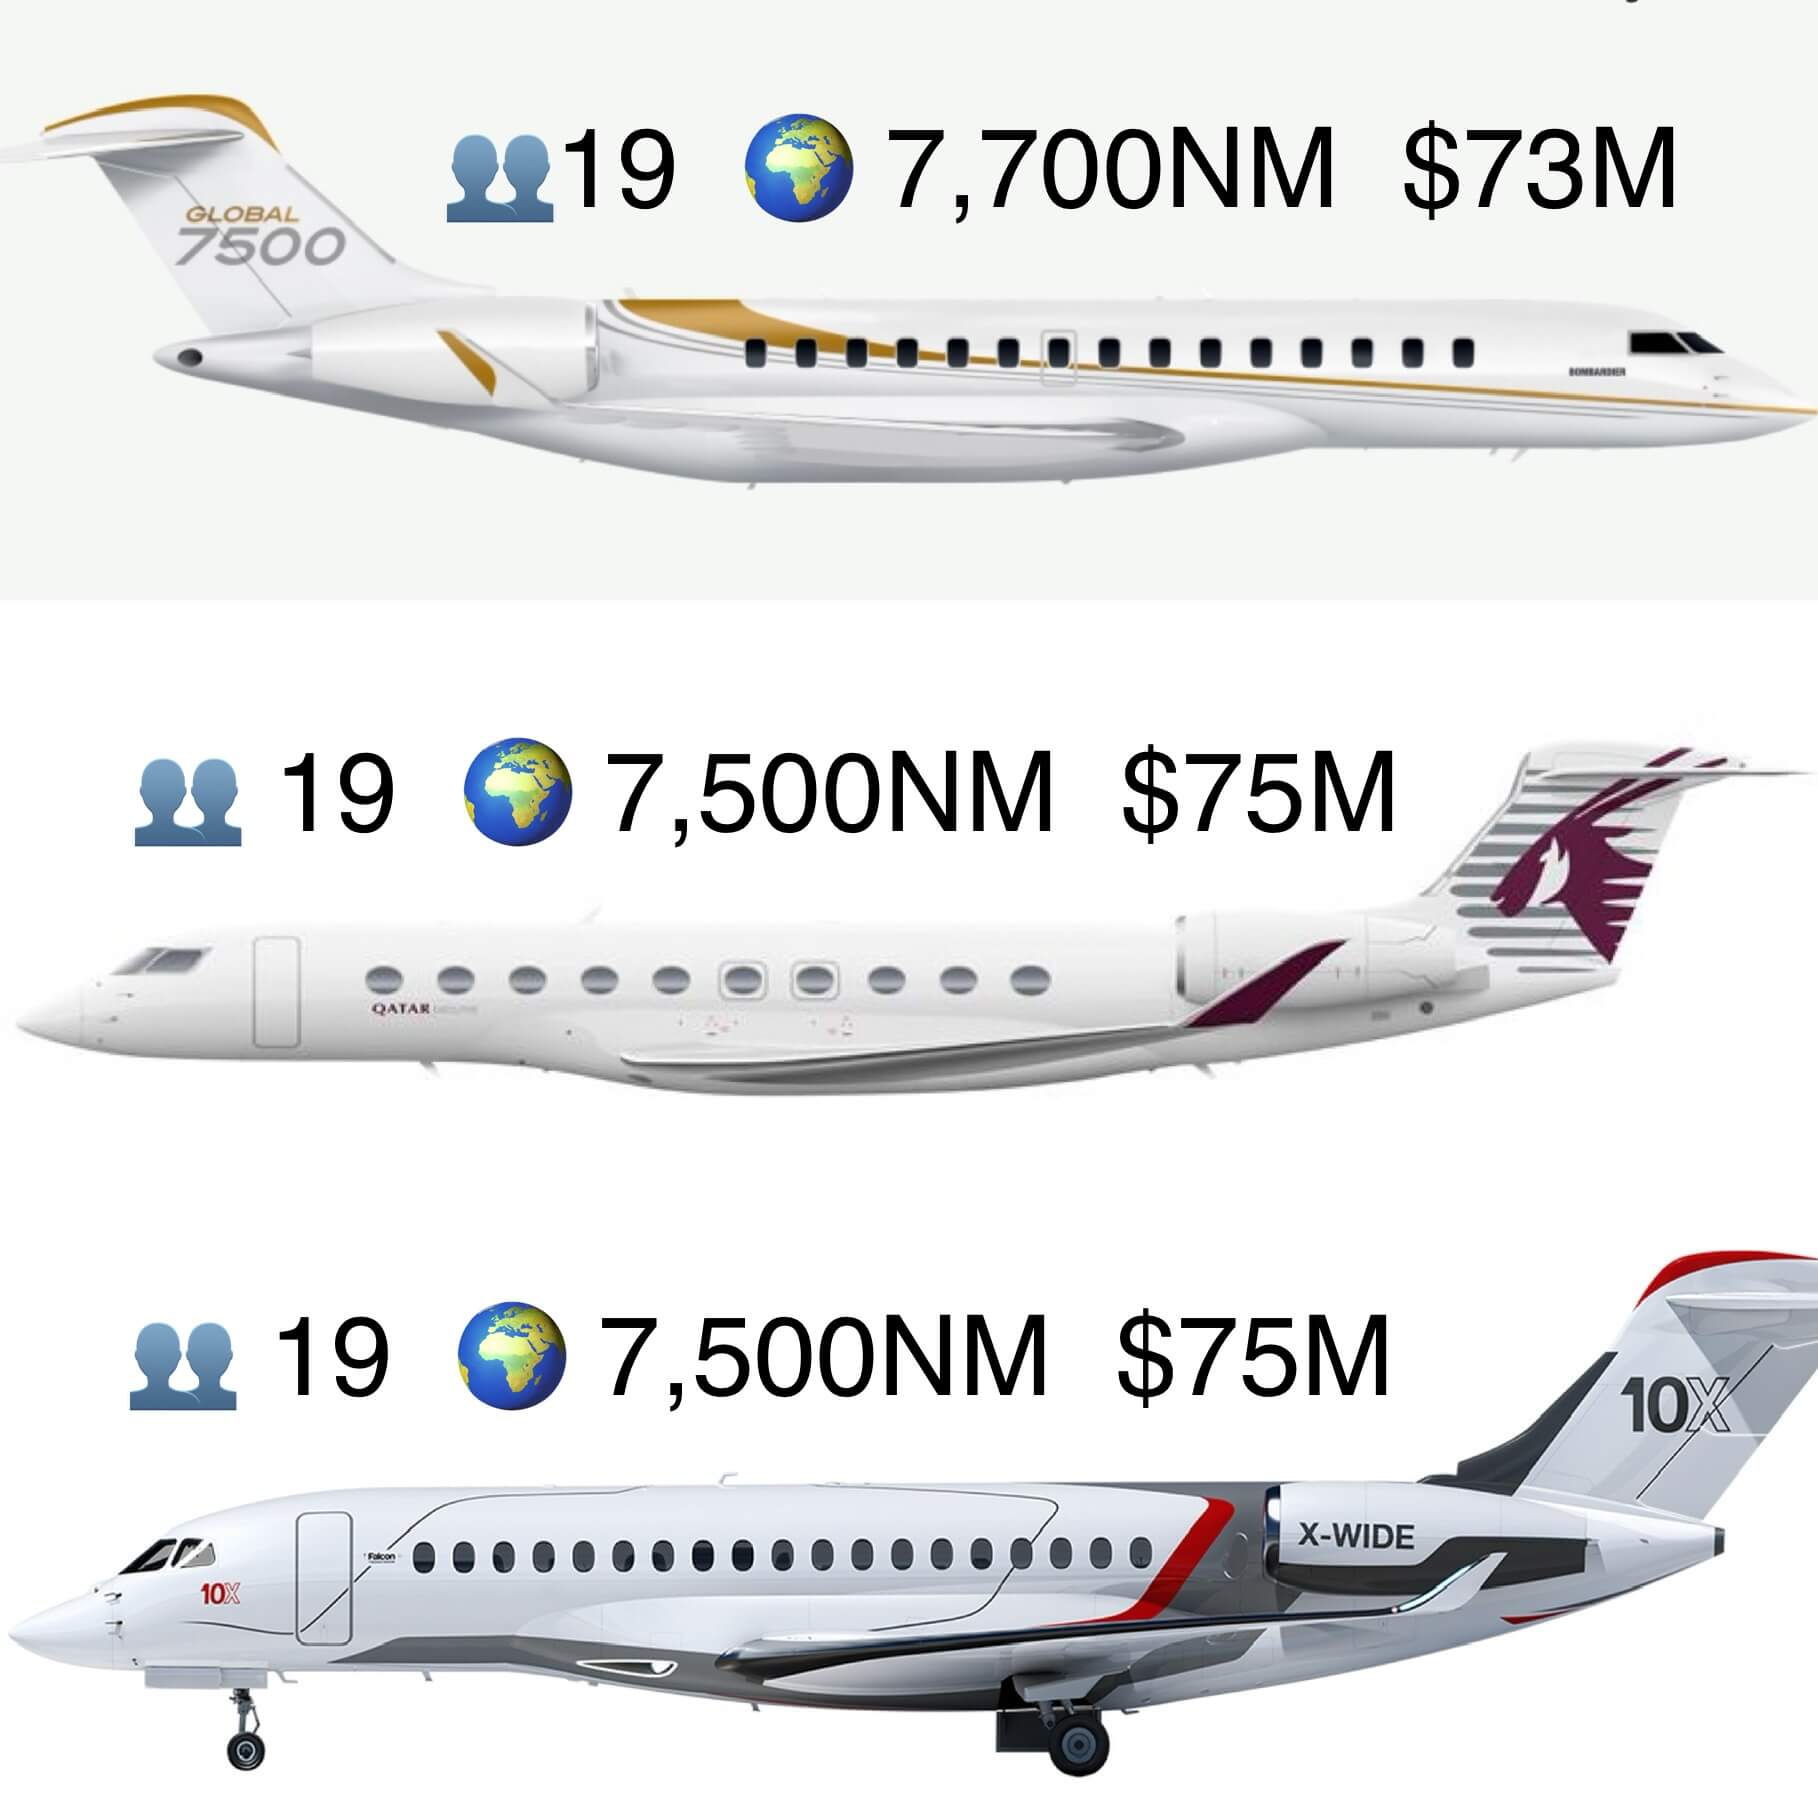 The World’s Best Private Jets 2022 Costing Over $70M Each